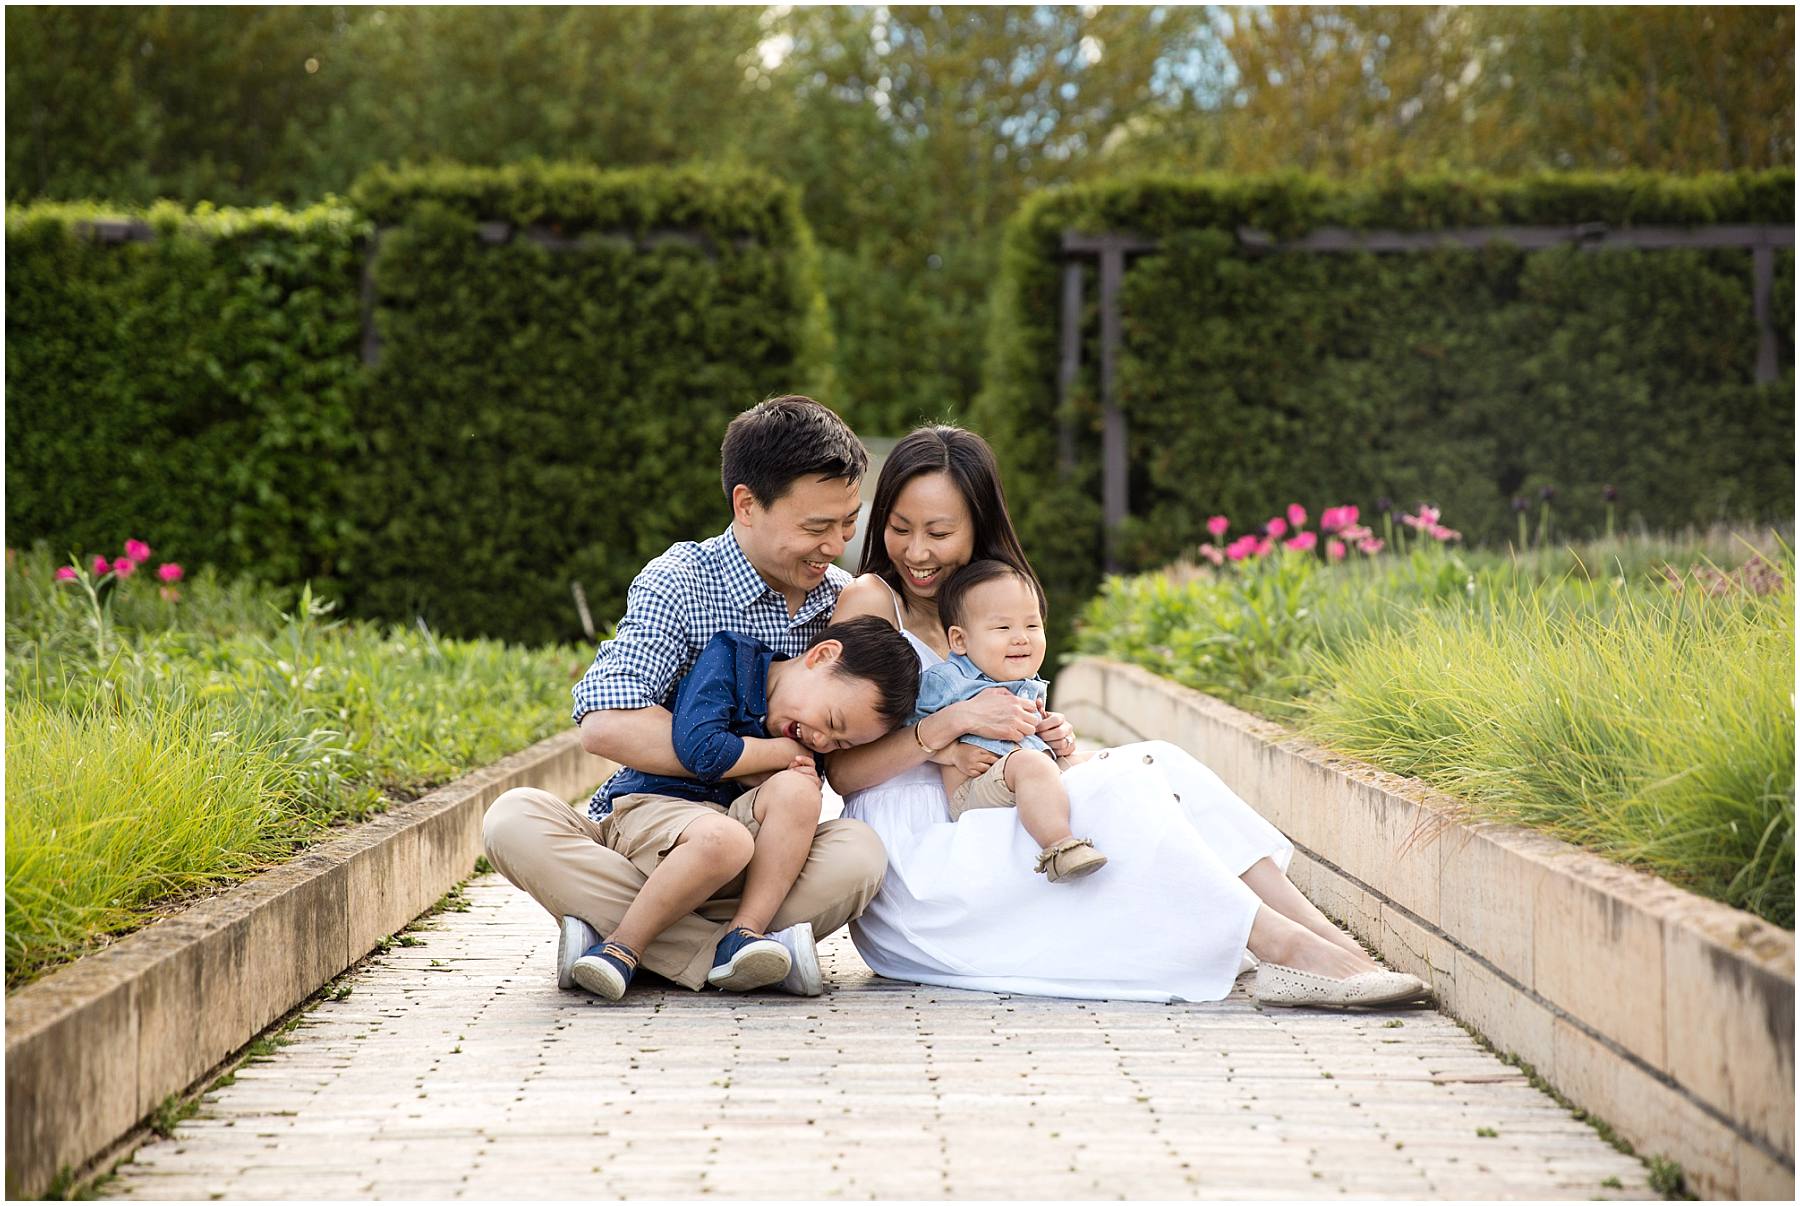 Chicago Lifestyle Family Photographer at Lurie Garden and Art Institute